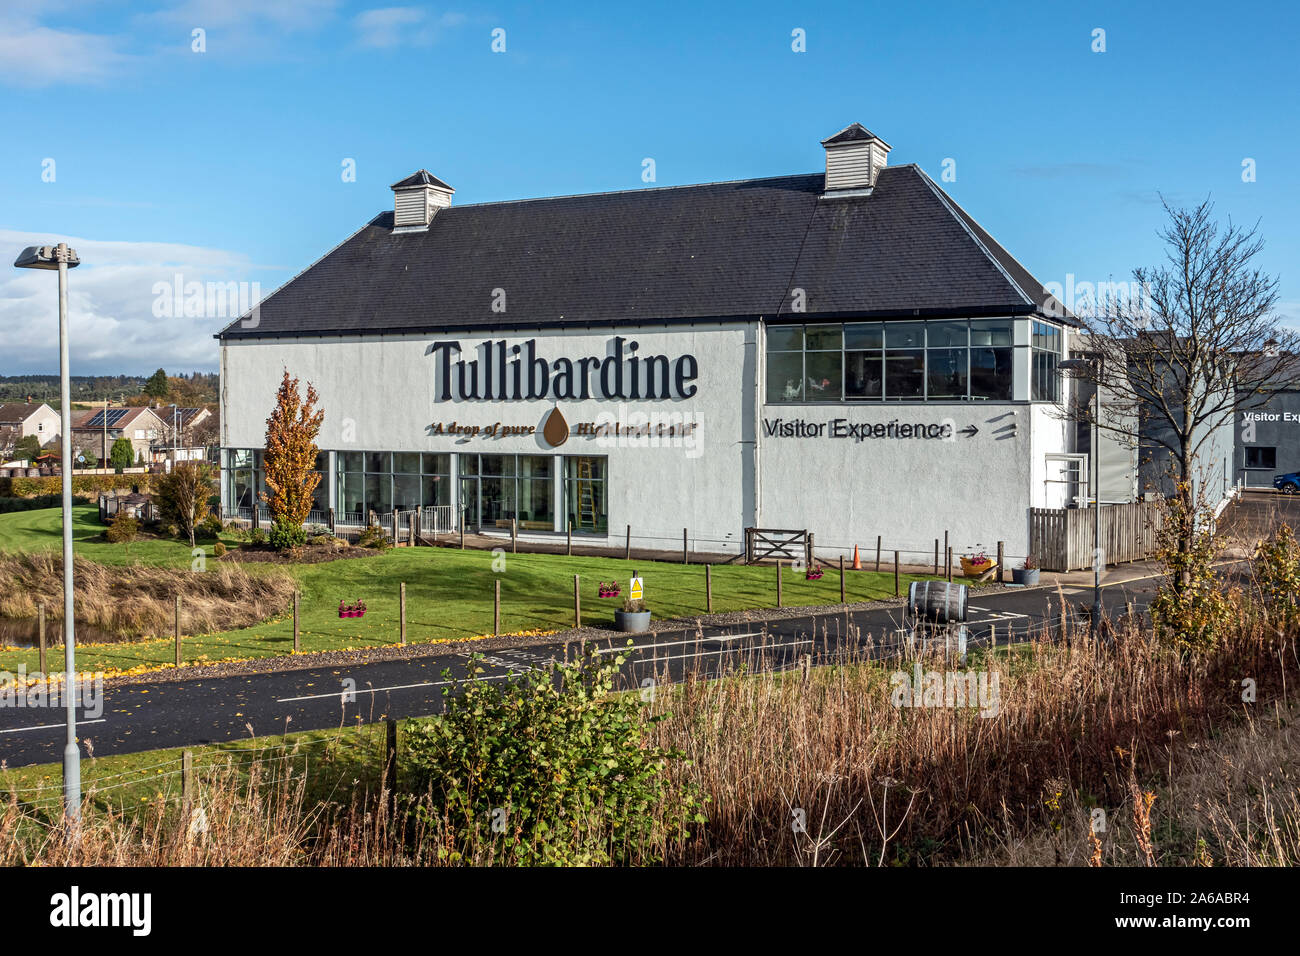 West facing view of Tullibardine distillery producing Scotch single malt whisky in Blackford Perth and Kinross Scotland UK beside A9 on right Stock Photo